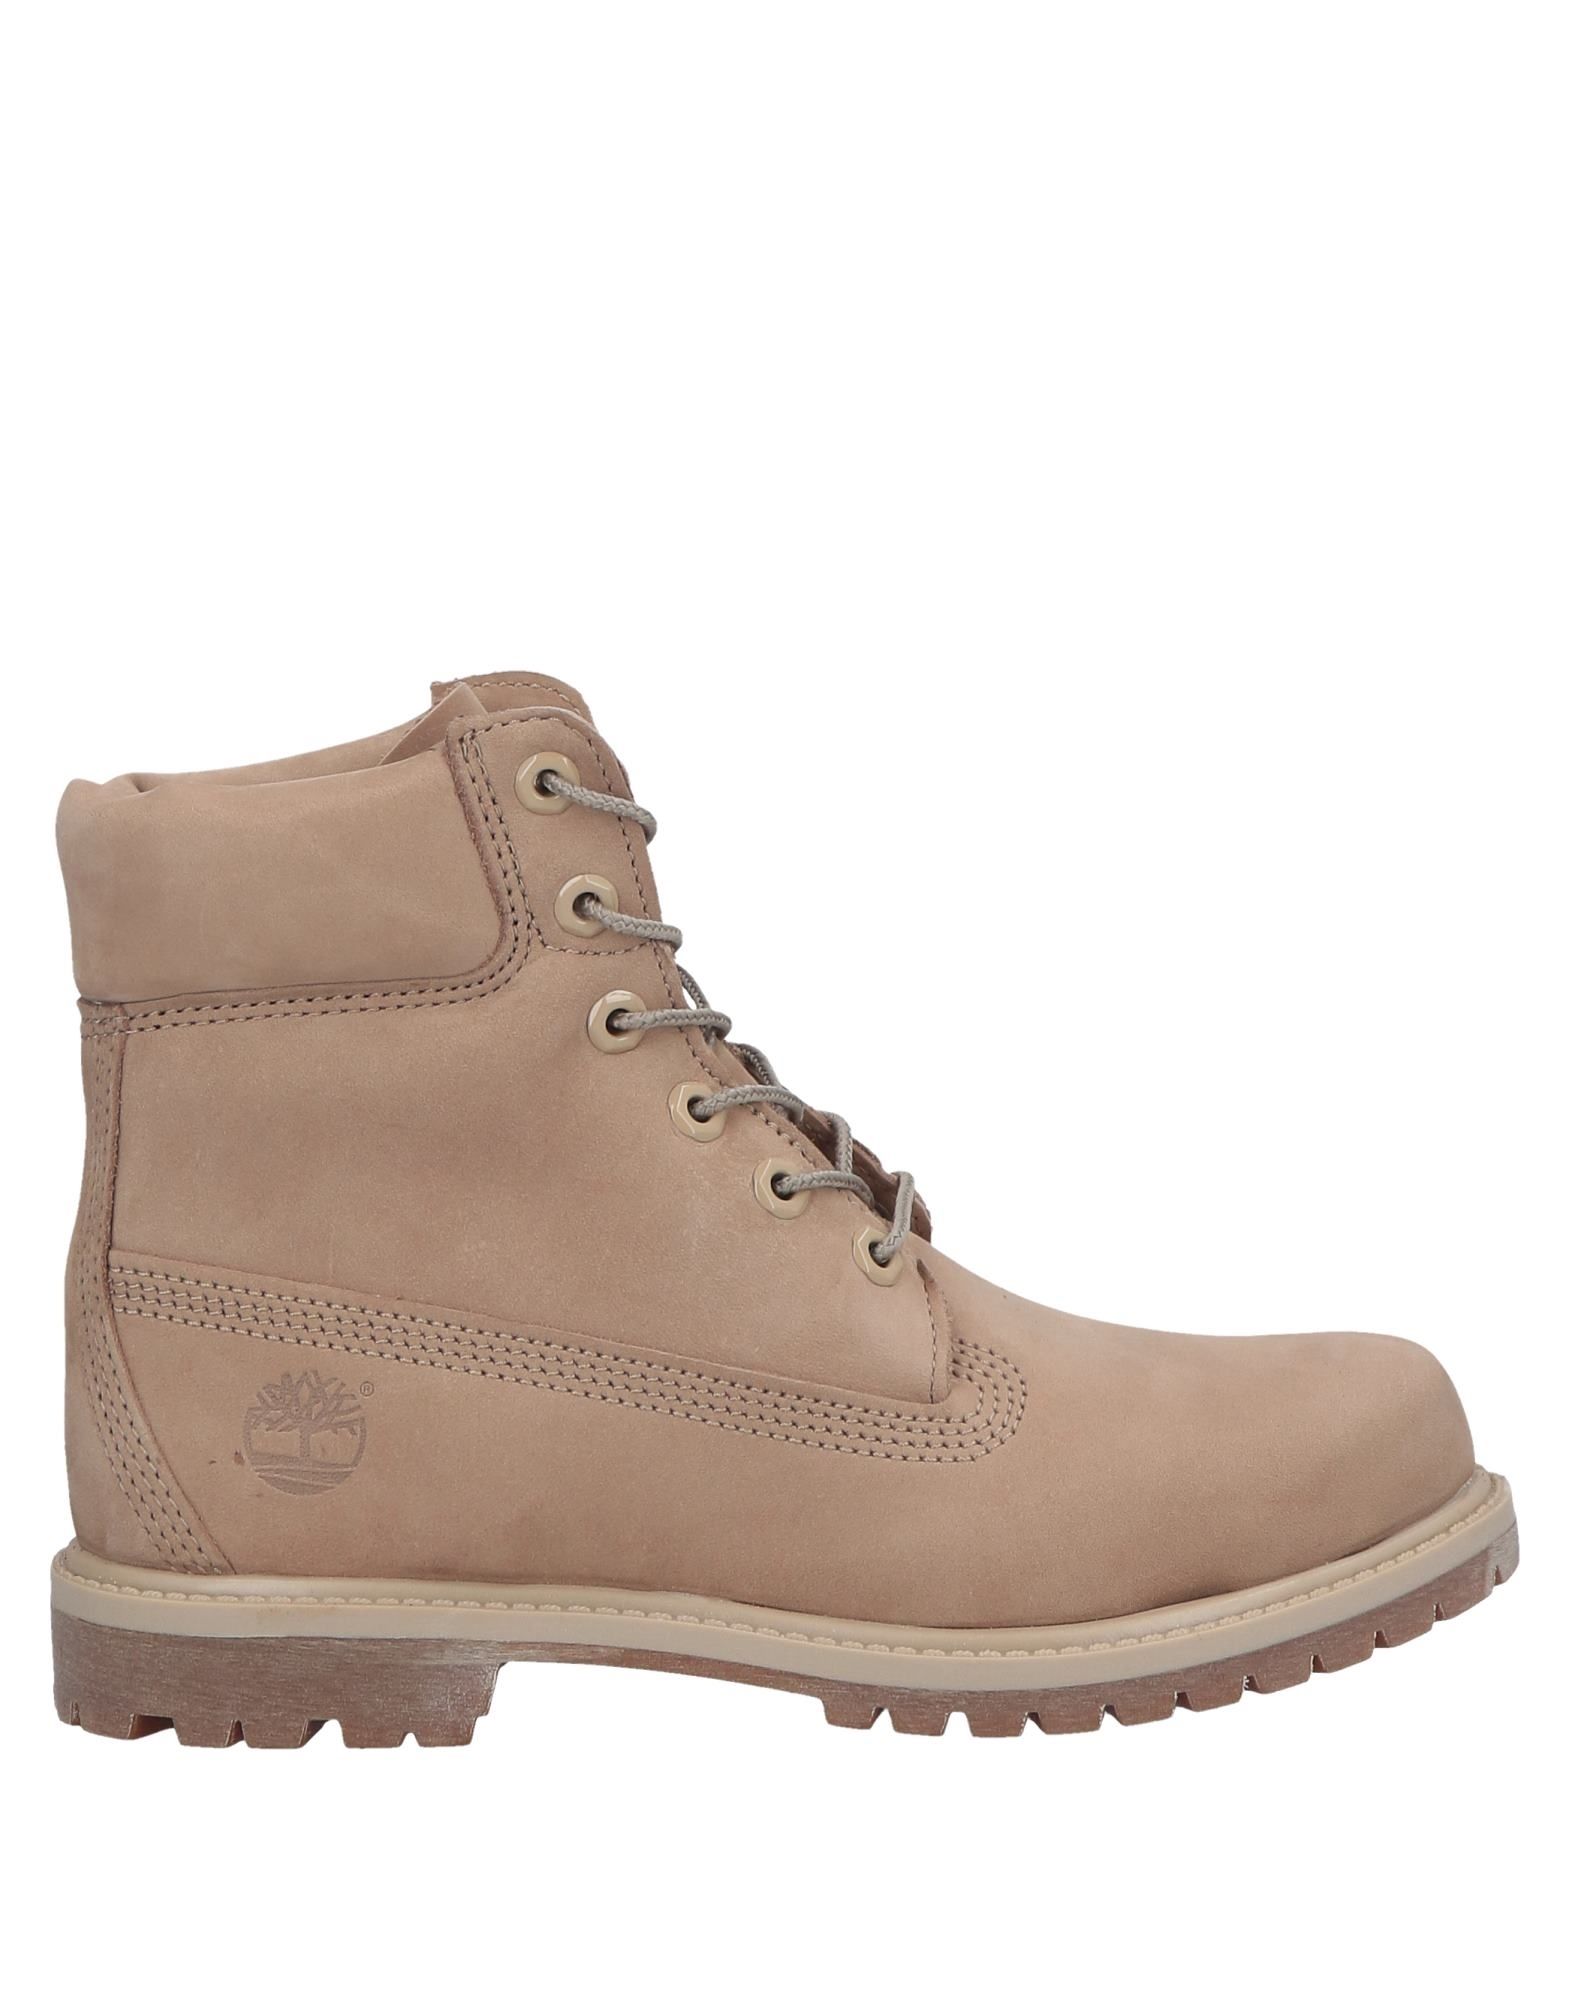 sand colored timberland boots